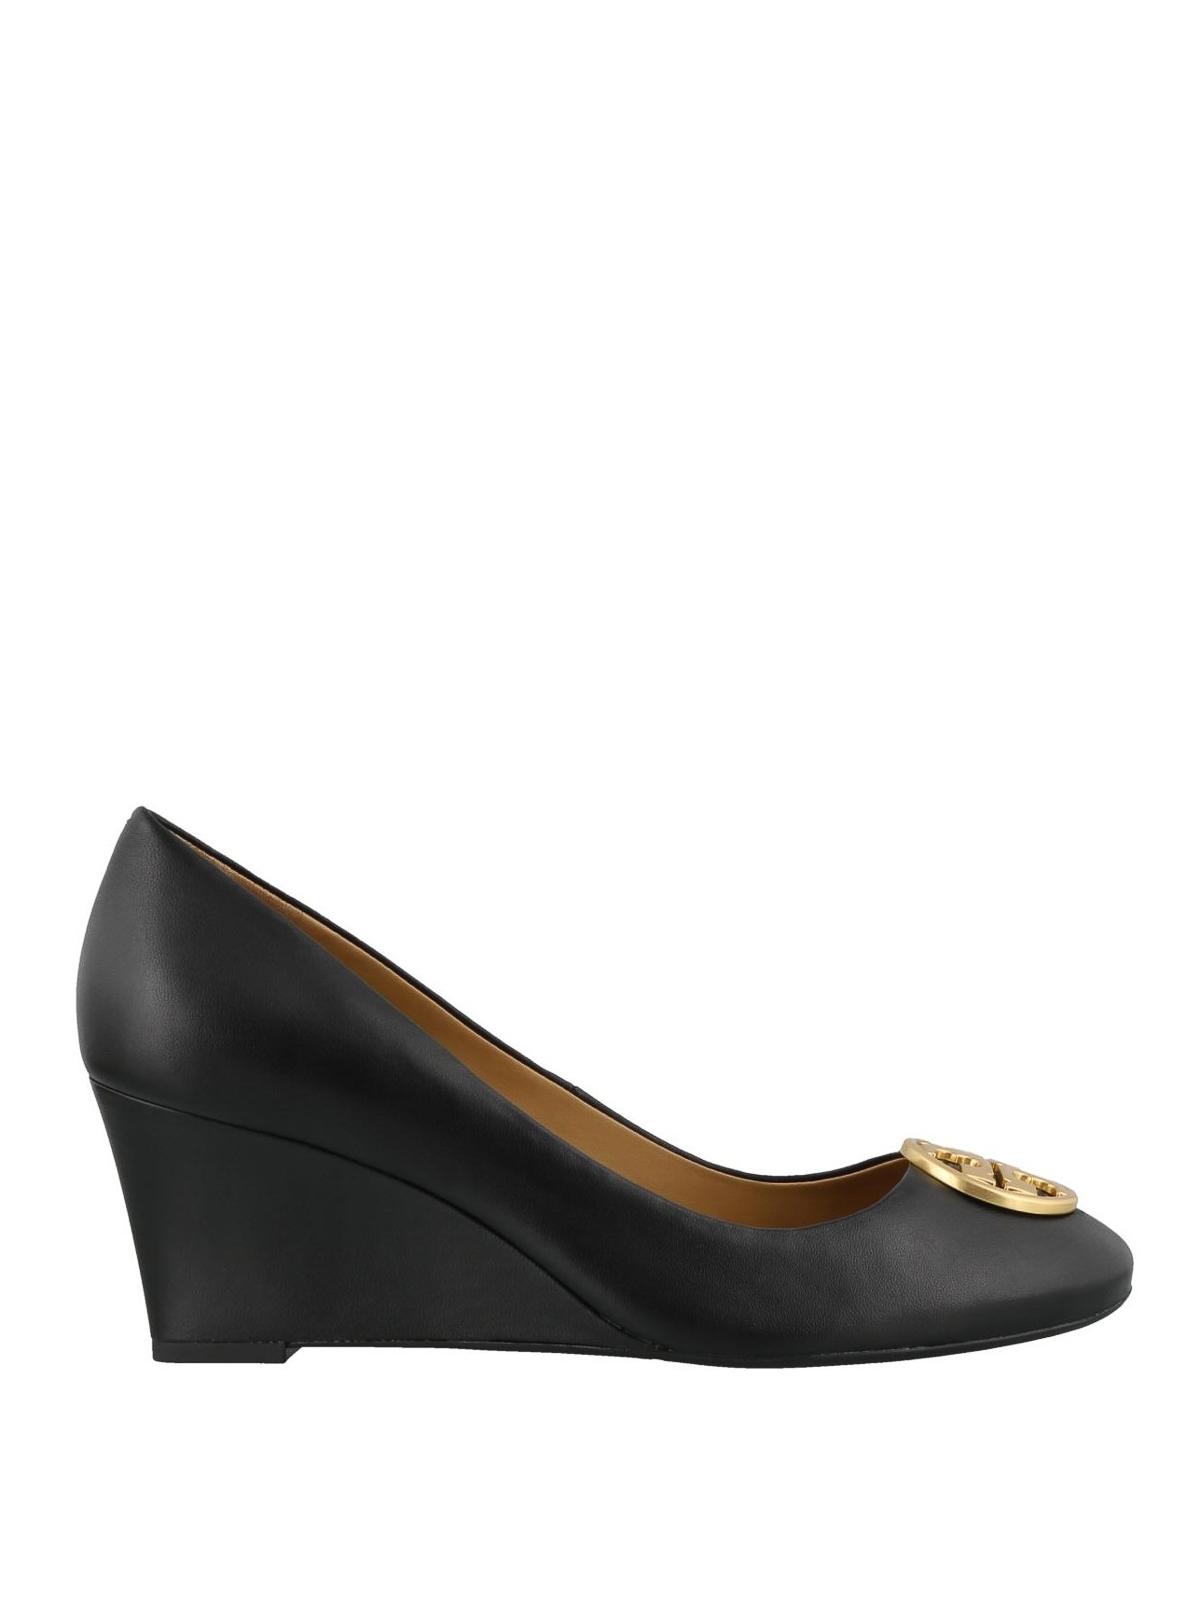 Tory Burch Chelsea Leather Wedge Pumps in Black - Lyst